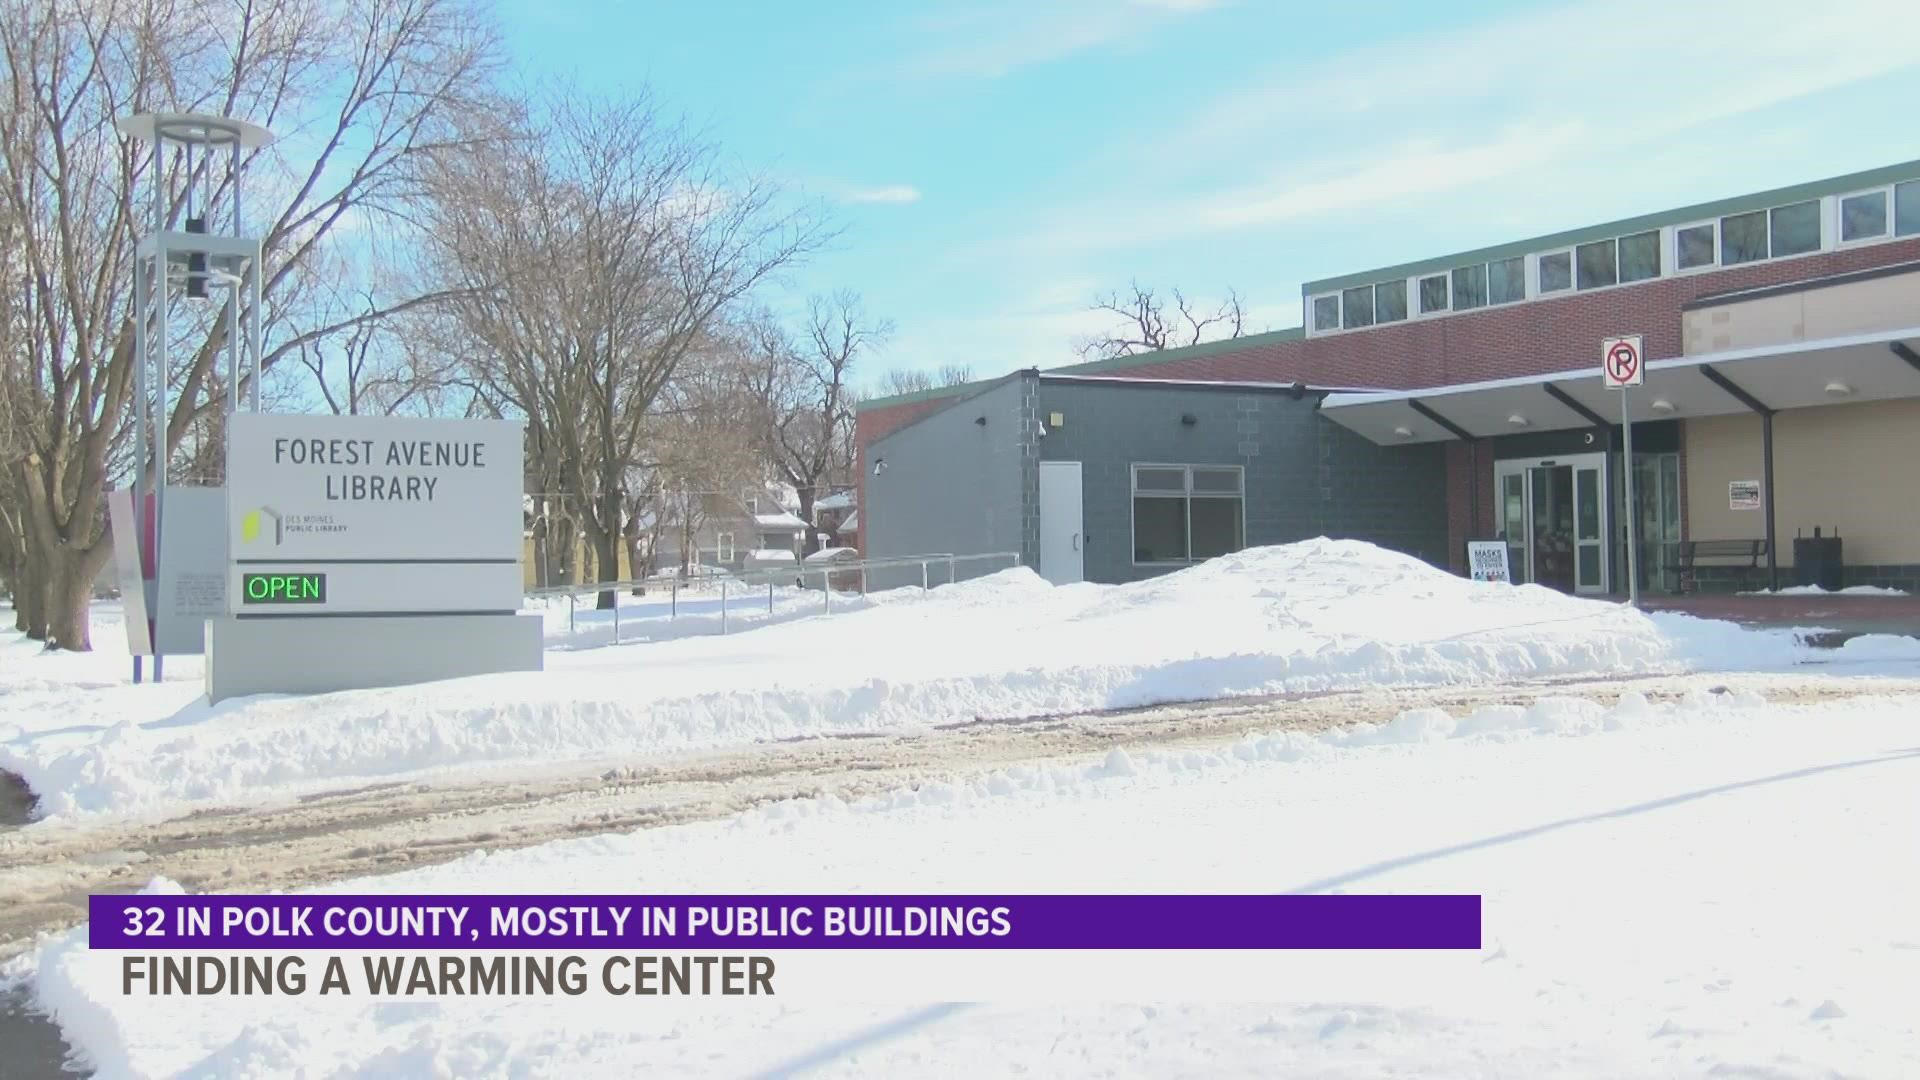 There are 32 warming centers within Polk County, 15 of which are in Des Moines.